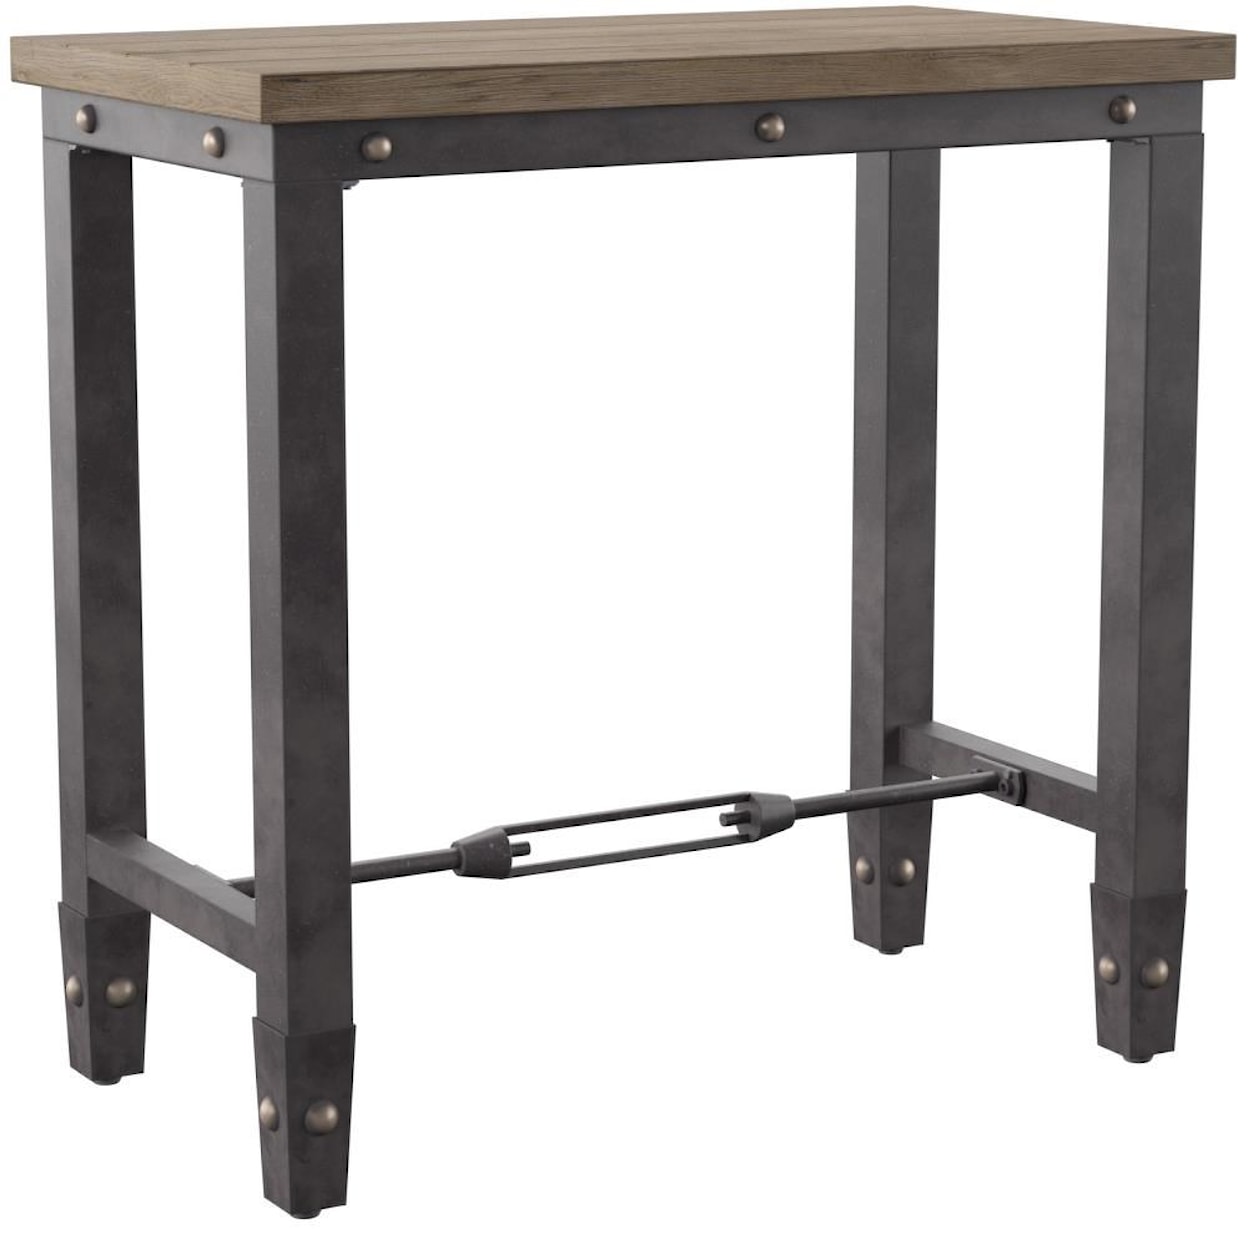 Steve Silver Jersey Chairside End Table